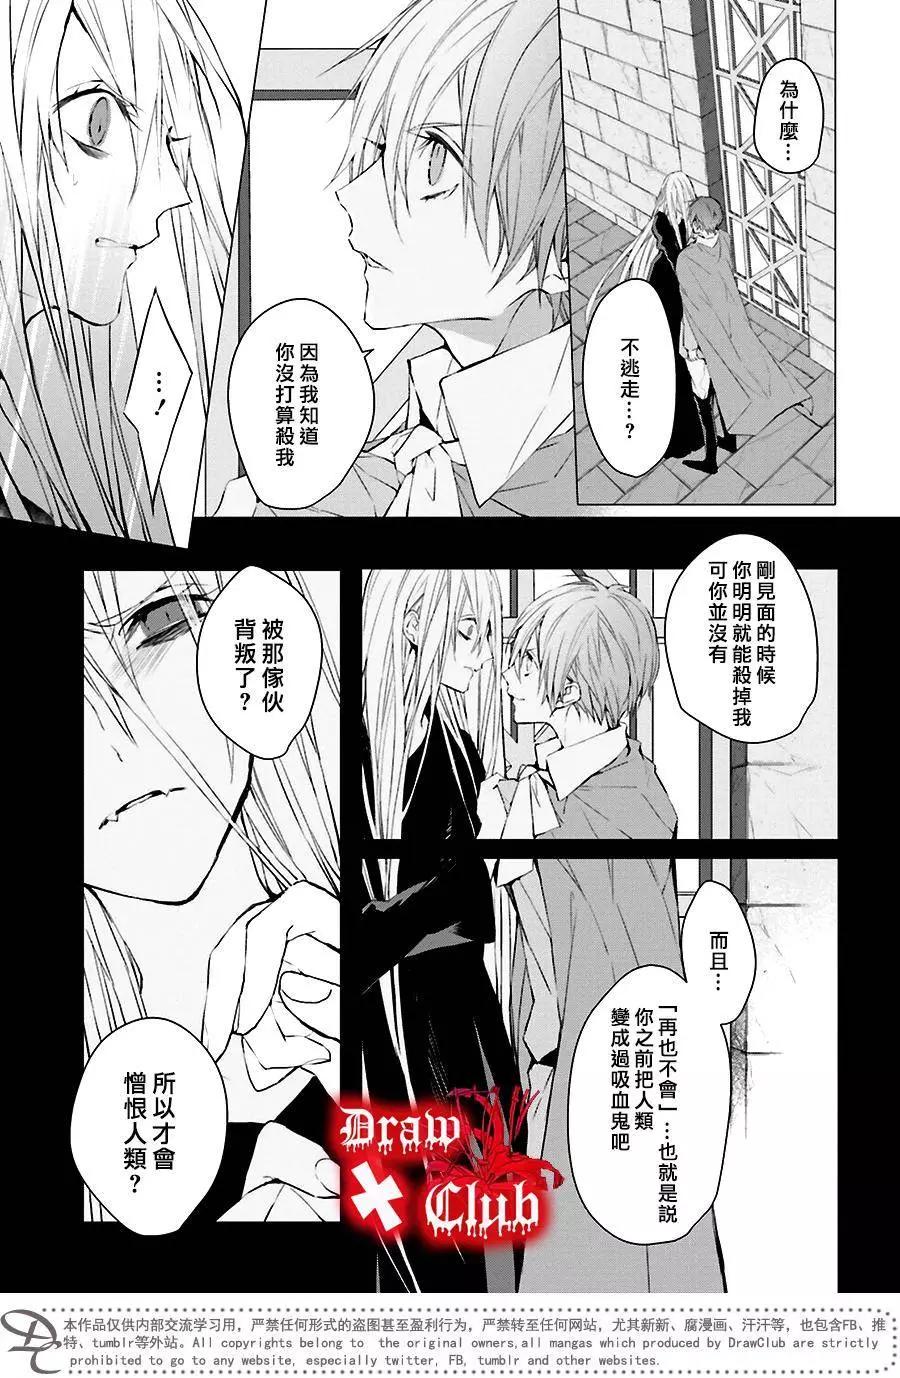 Bloody Mary - 第33回 - 2